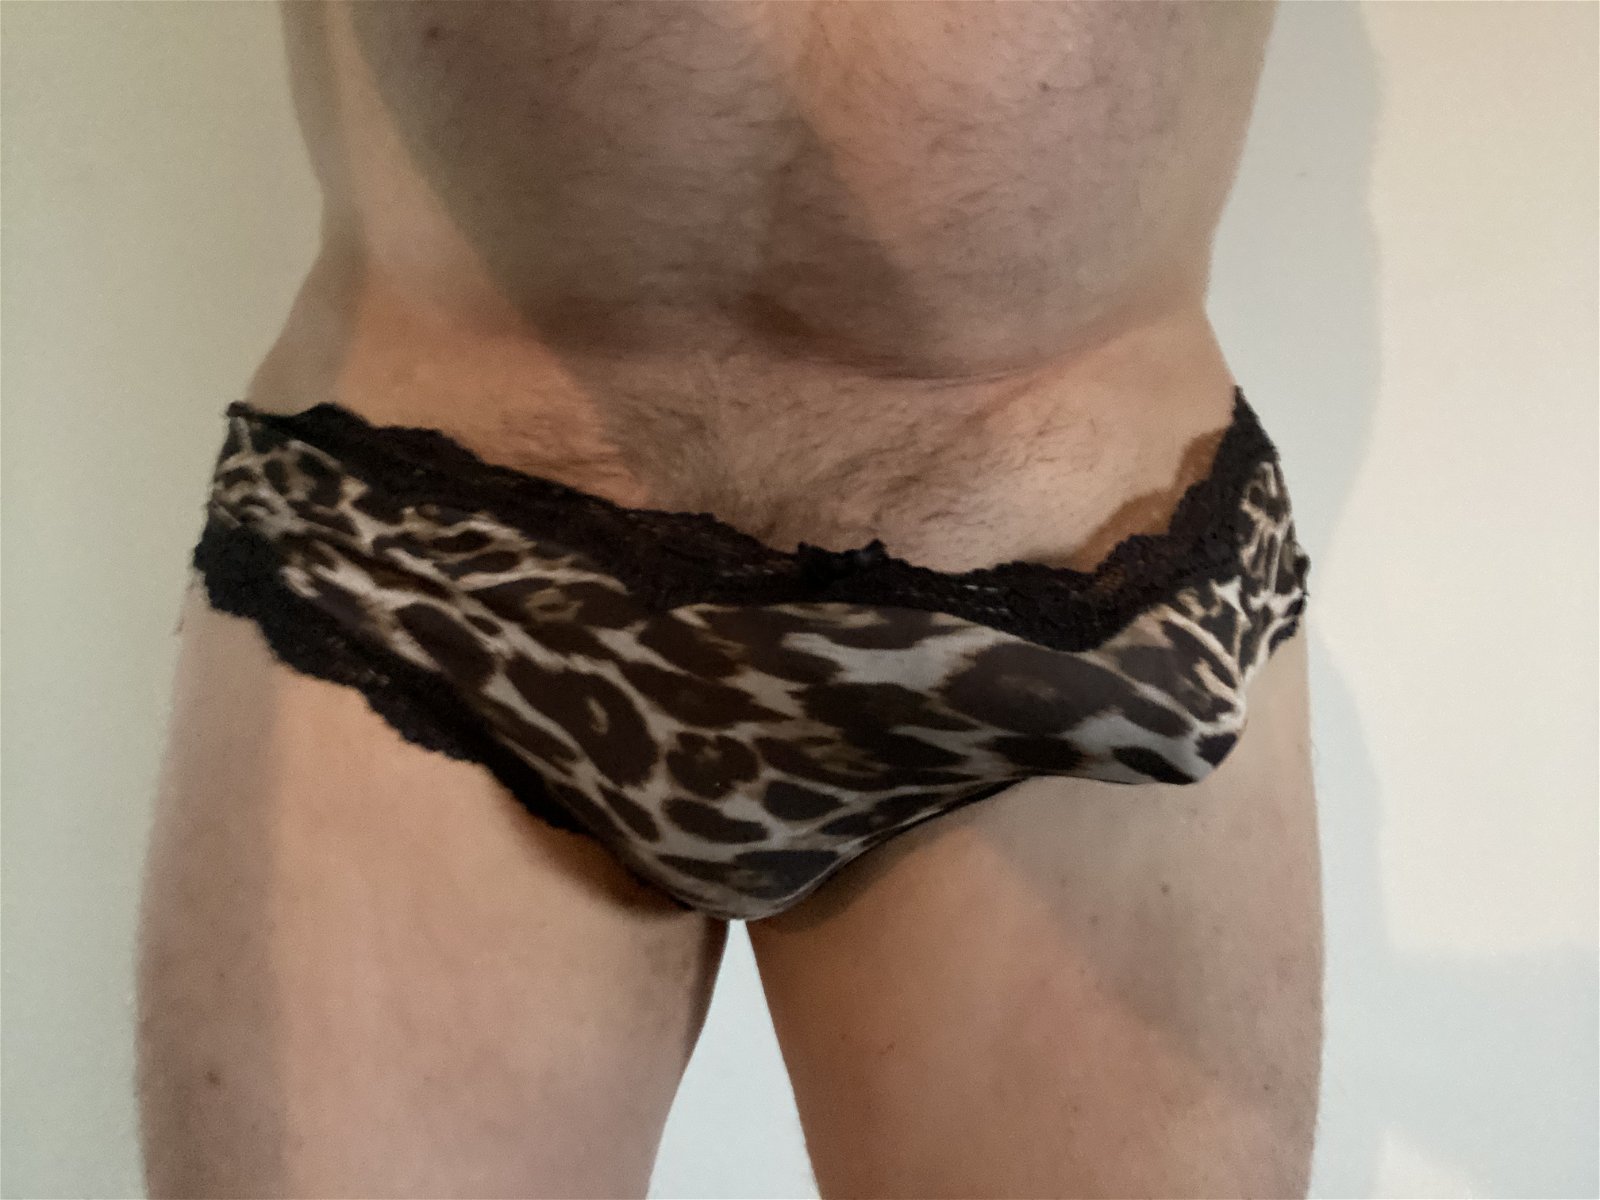 Photo by Men in Stockings, Nylons & knickers with the username @Tanmyboy,  October 25, 2020 at 7:00 AM. The post is about the topic Crossdressers and the text says 'He loves my knickers🍆'